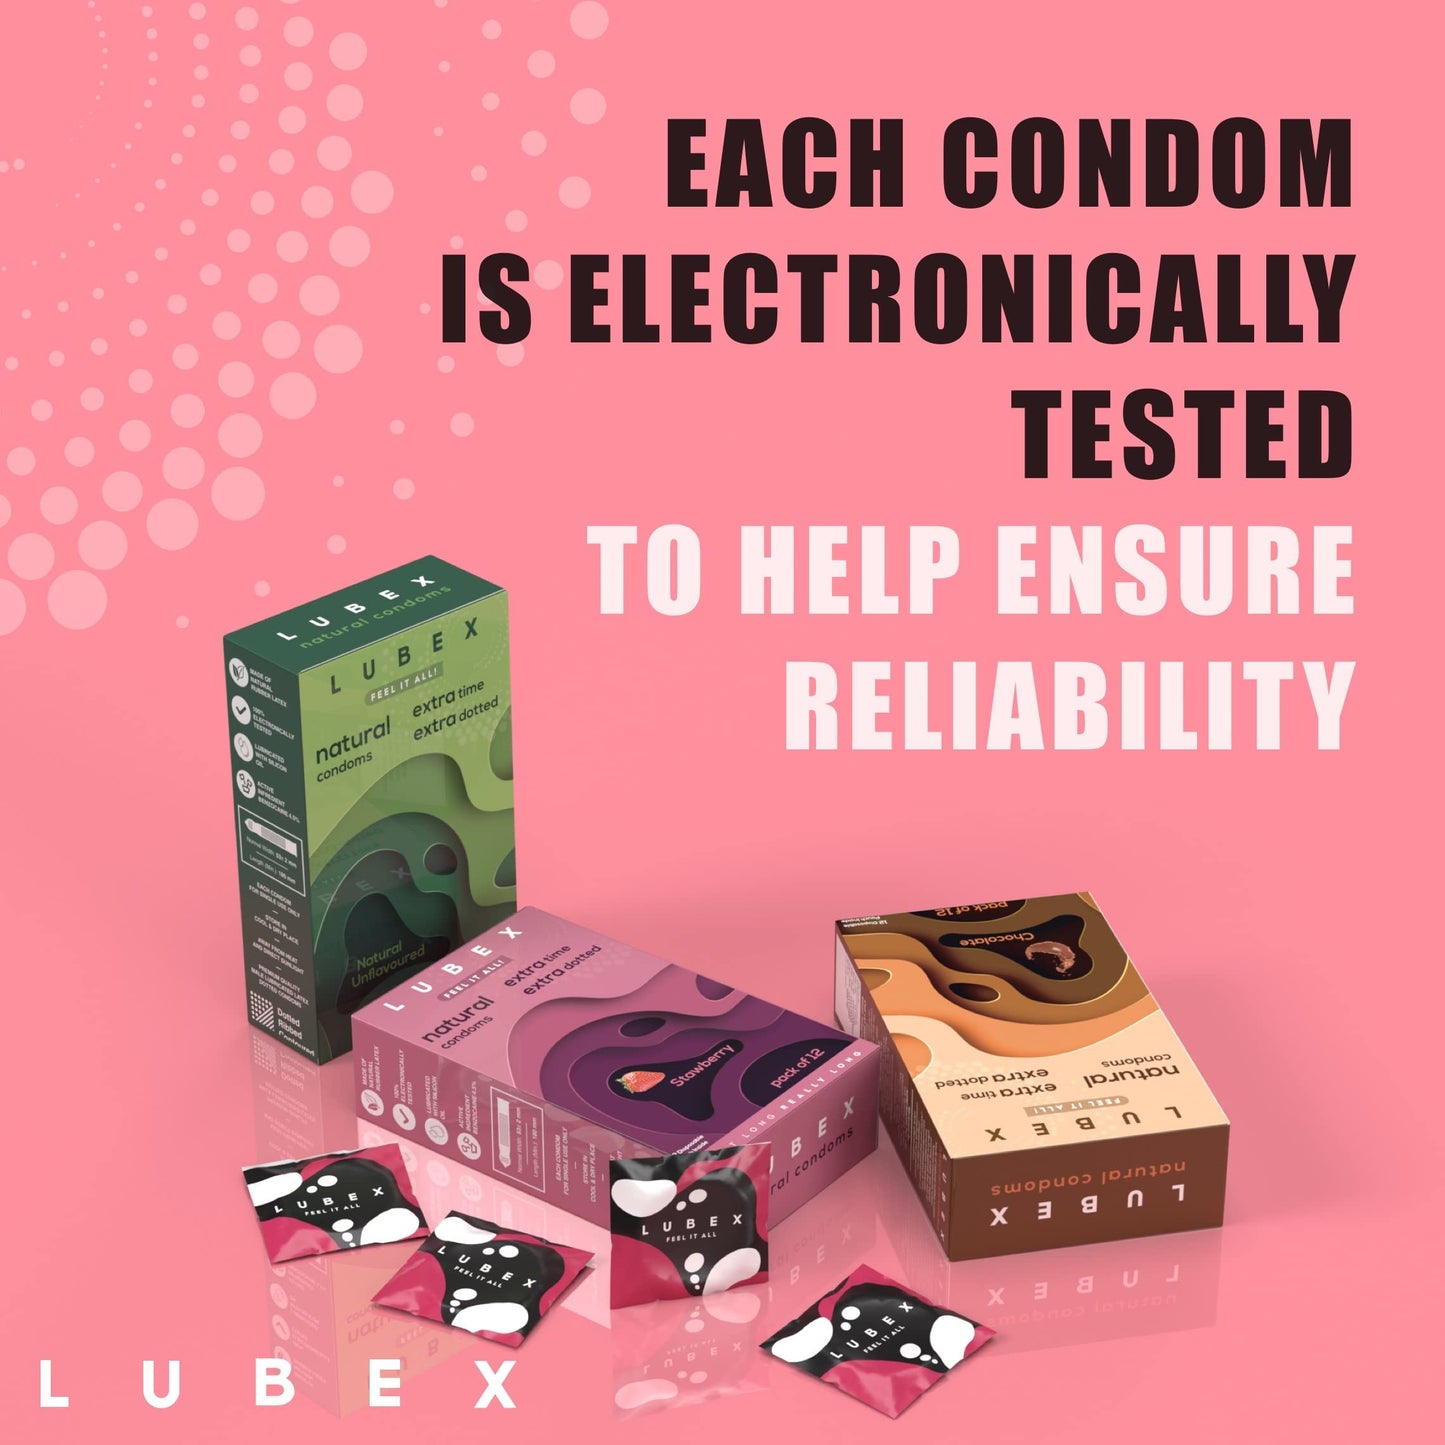 Lubex 6 in 1 Extra Time Condoms with Disposable Bags - Ultra Thin & Extra Dotted - Strawberry Flavour - 36 Condom (Pack of 3)